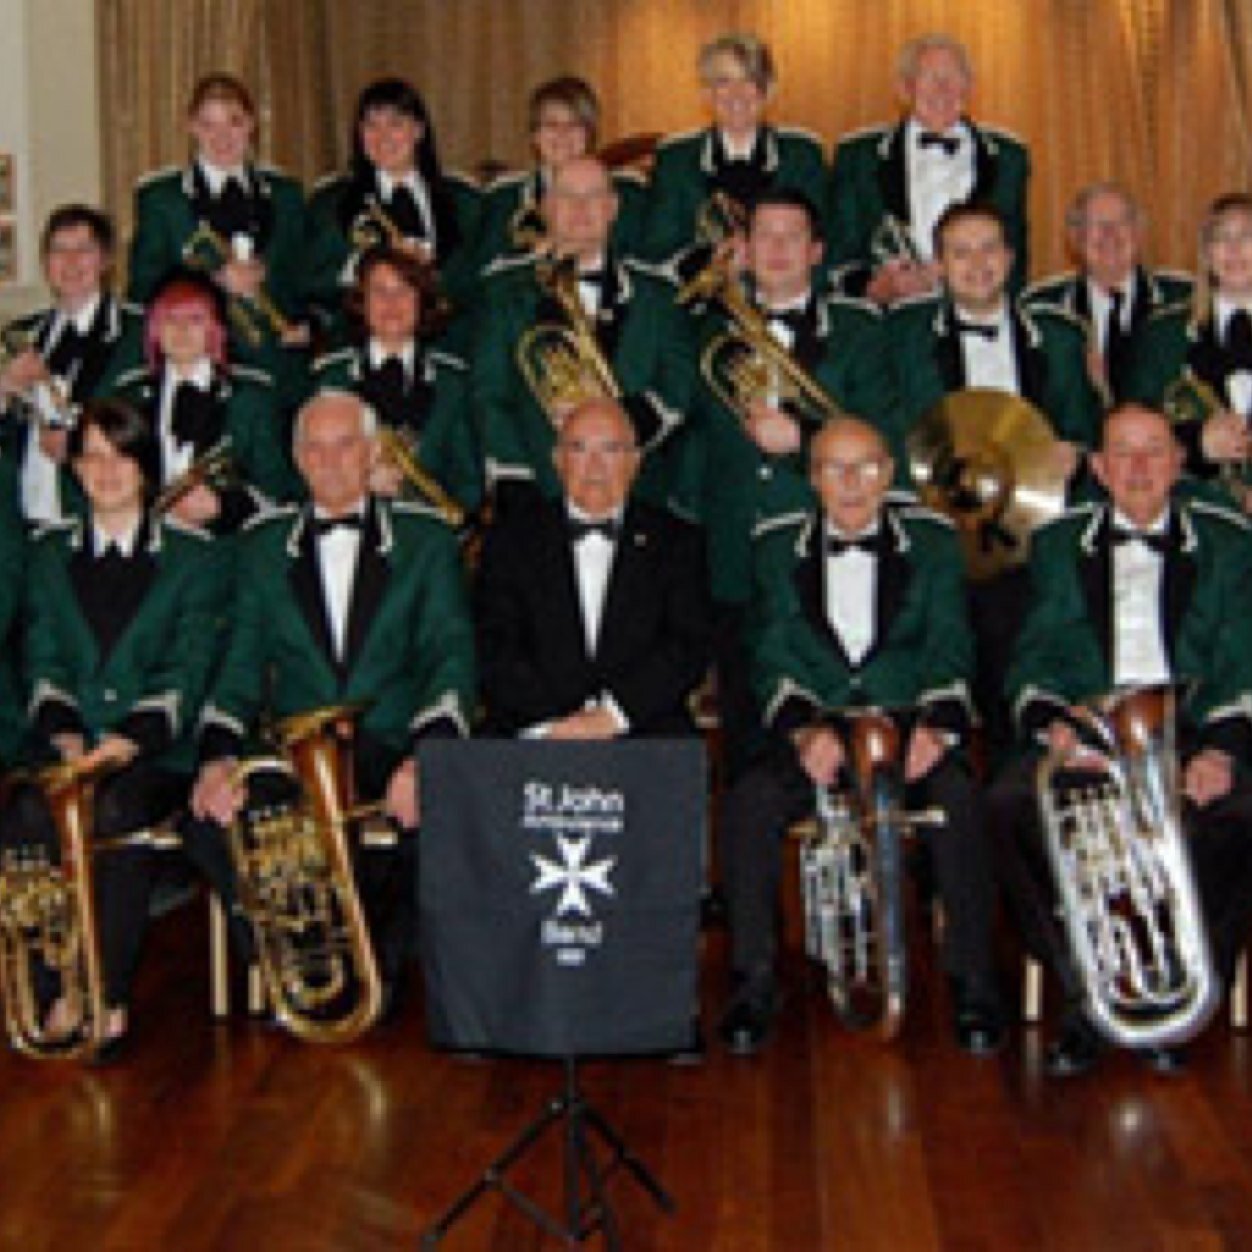 We are the St John Ambulance brass band in the West Midlands Region open to new players always, rehersal is Wednesday 7:30pm-9pm we play for fun no comps!